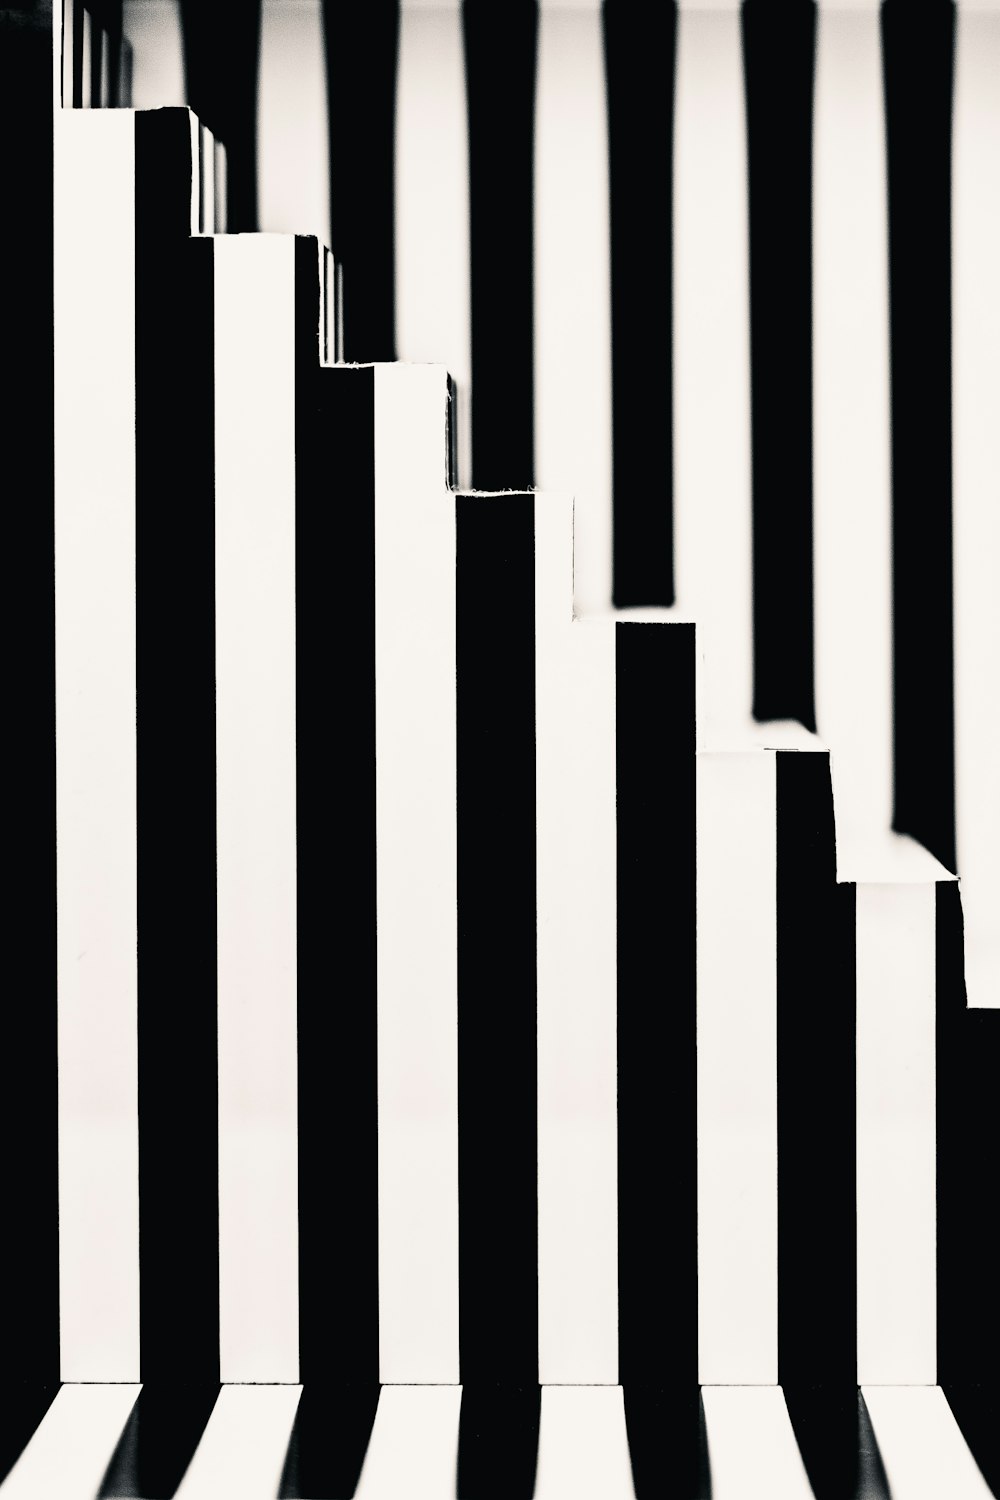 a black and white photo of a number of vertical lines